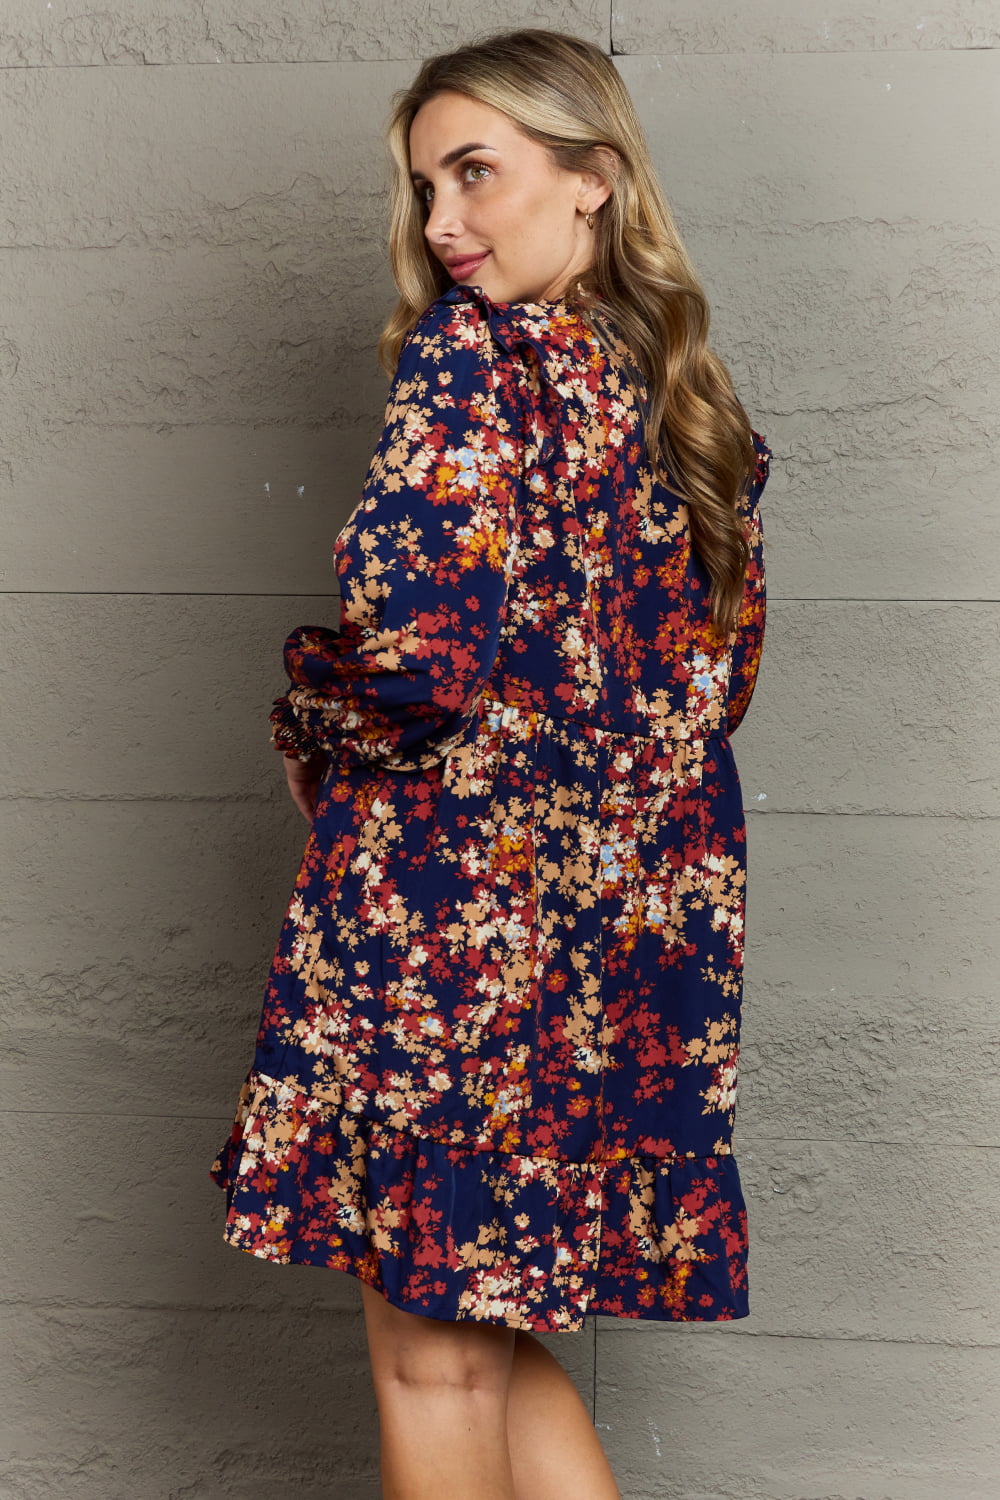 Floral Dress for Any Occasion with Smocked Sleeve Band